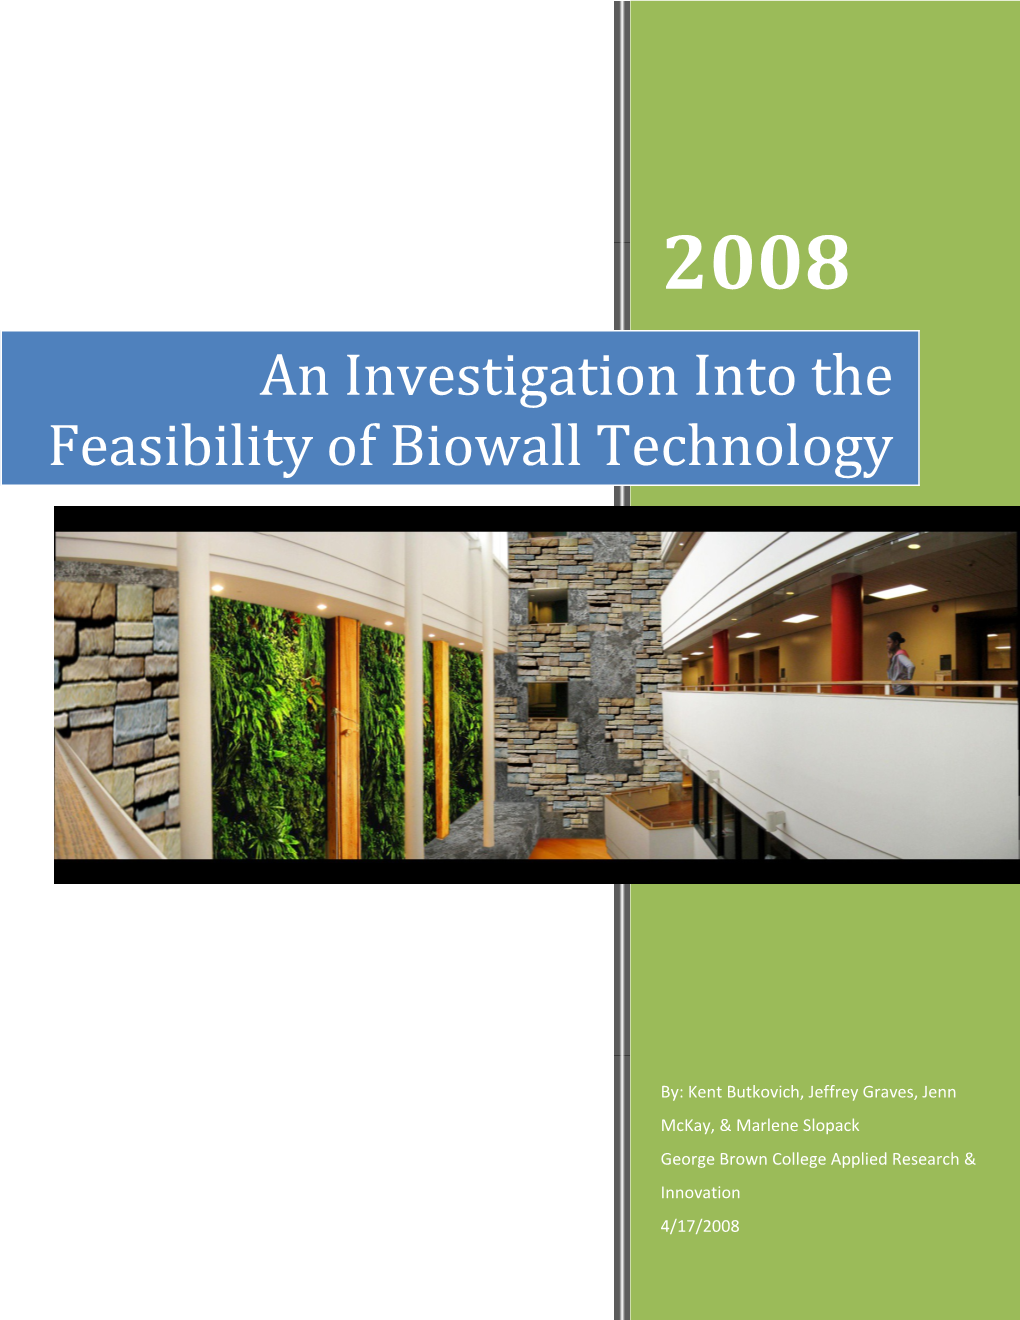 An Investigation Into the Feasibility of Biowall Technology